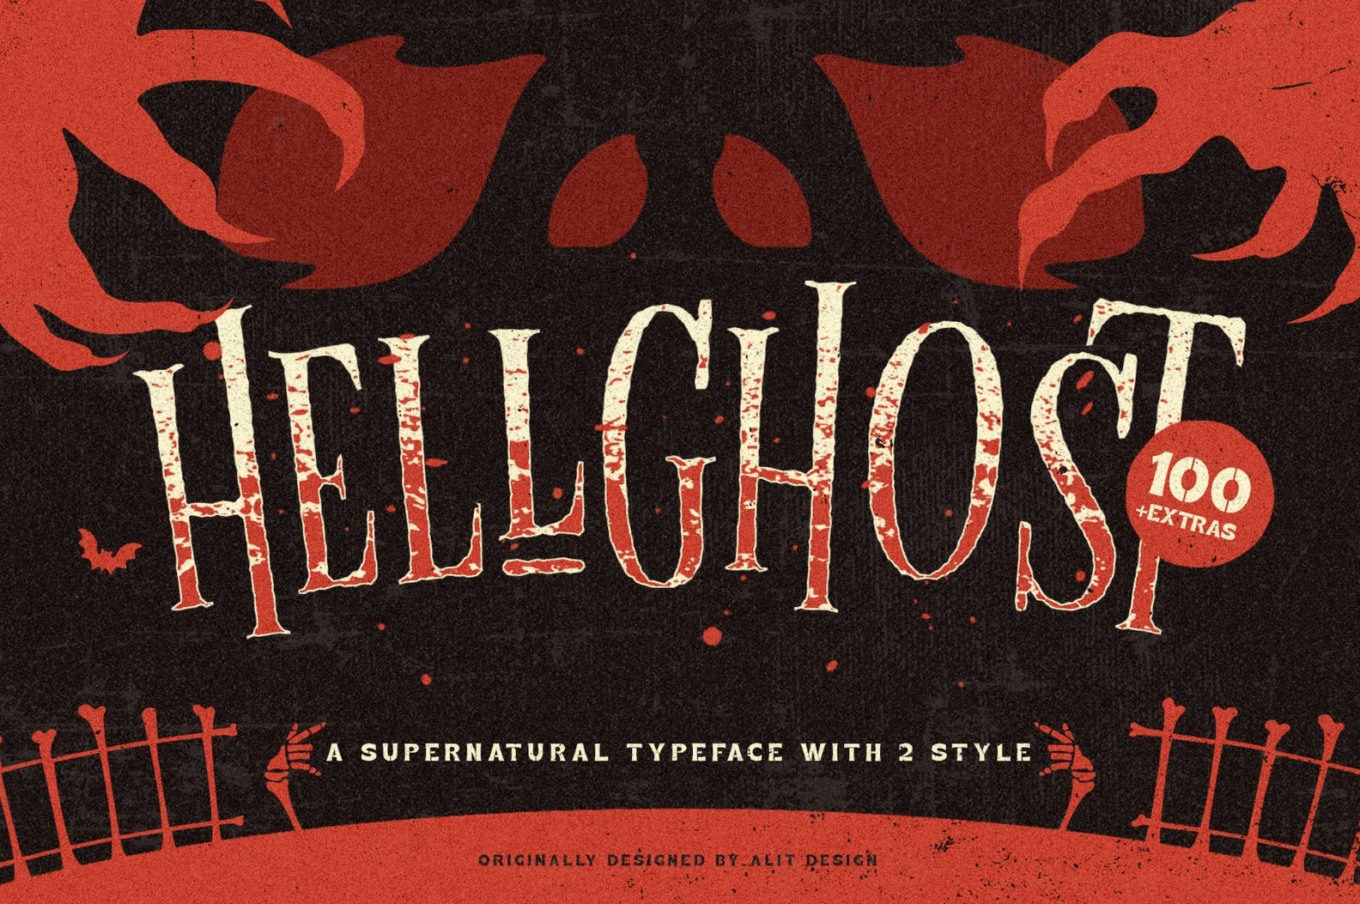 Example of Halloween-themed content. Promo graphic of a font called "HellGhost".